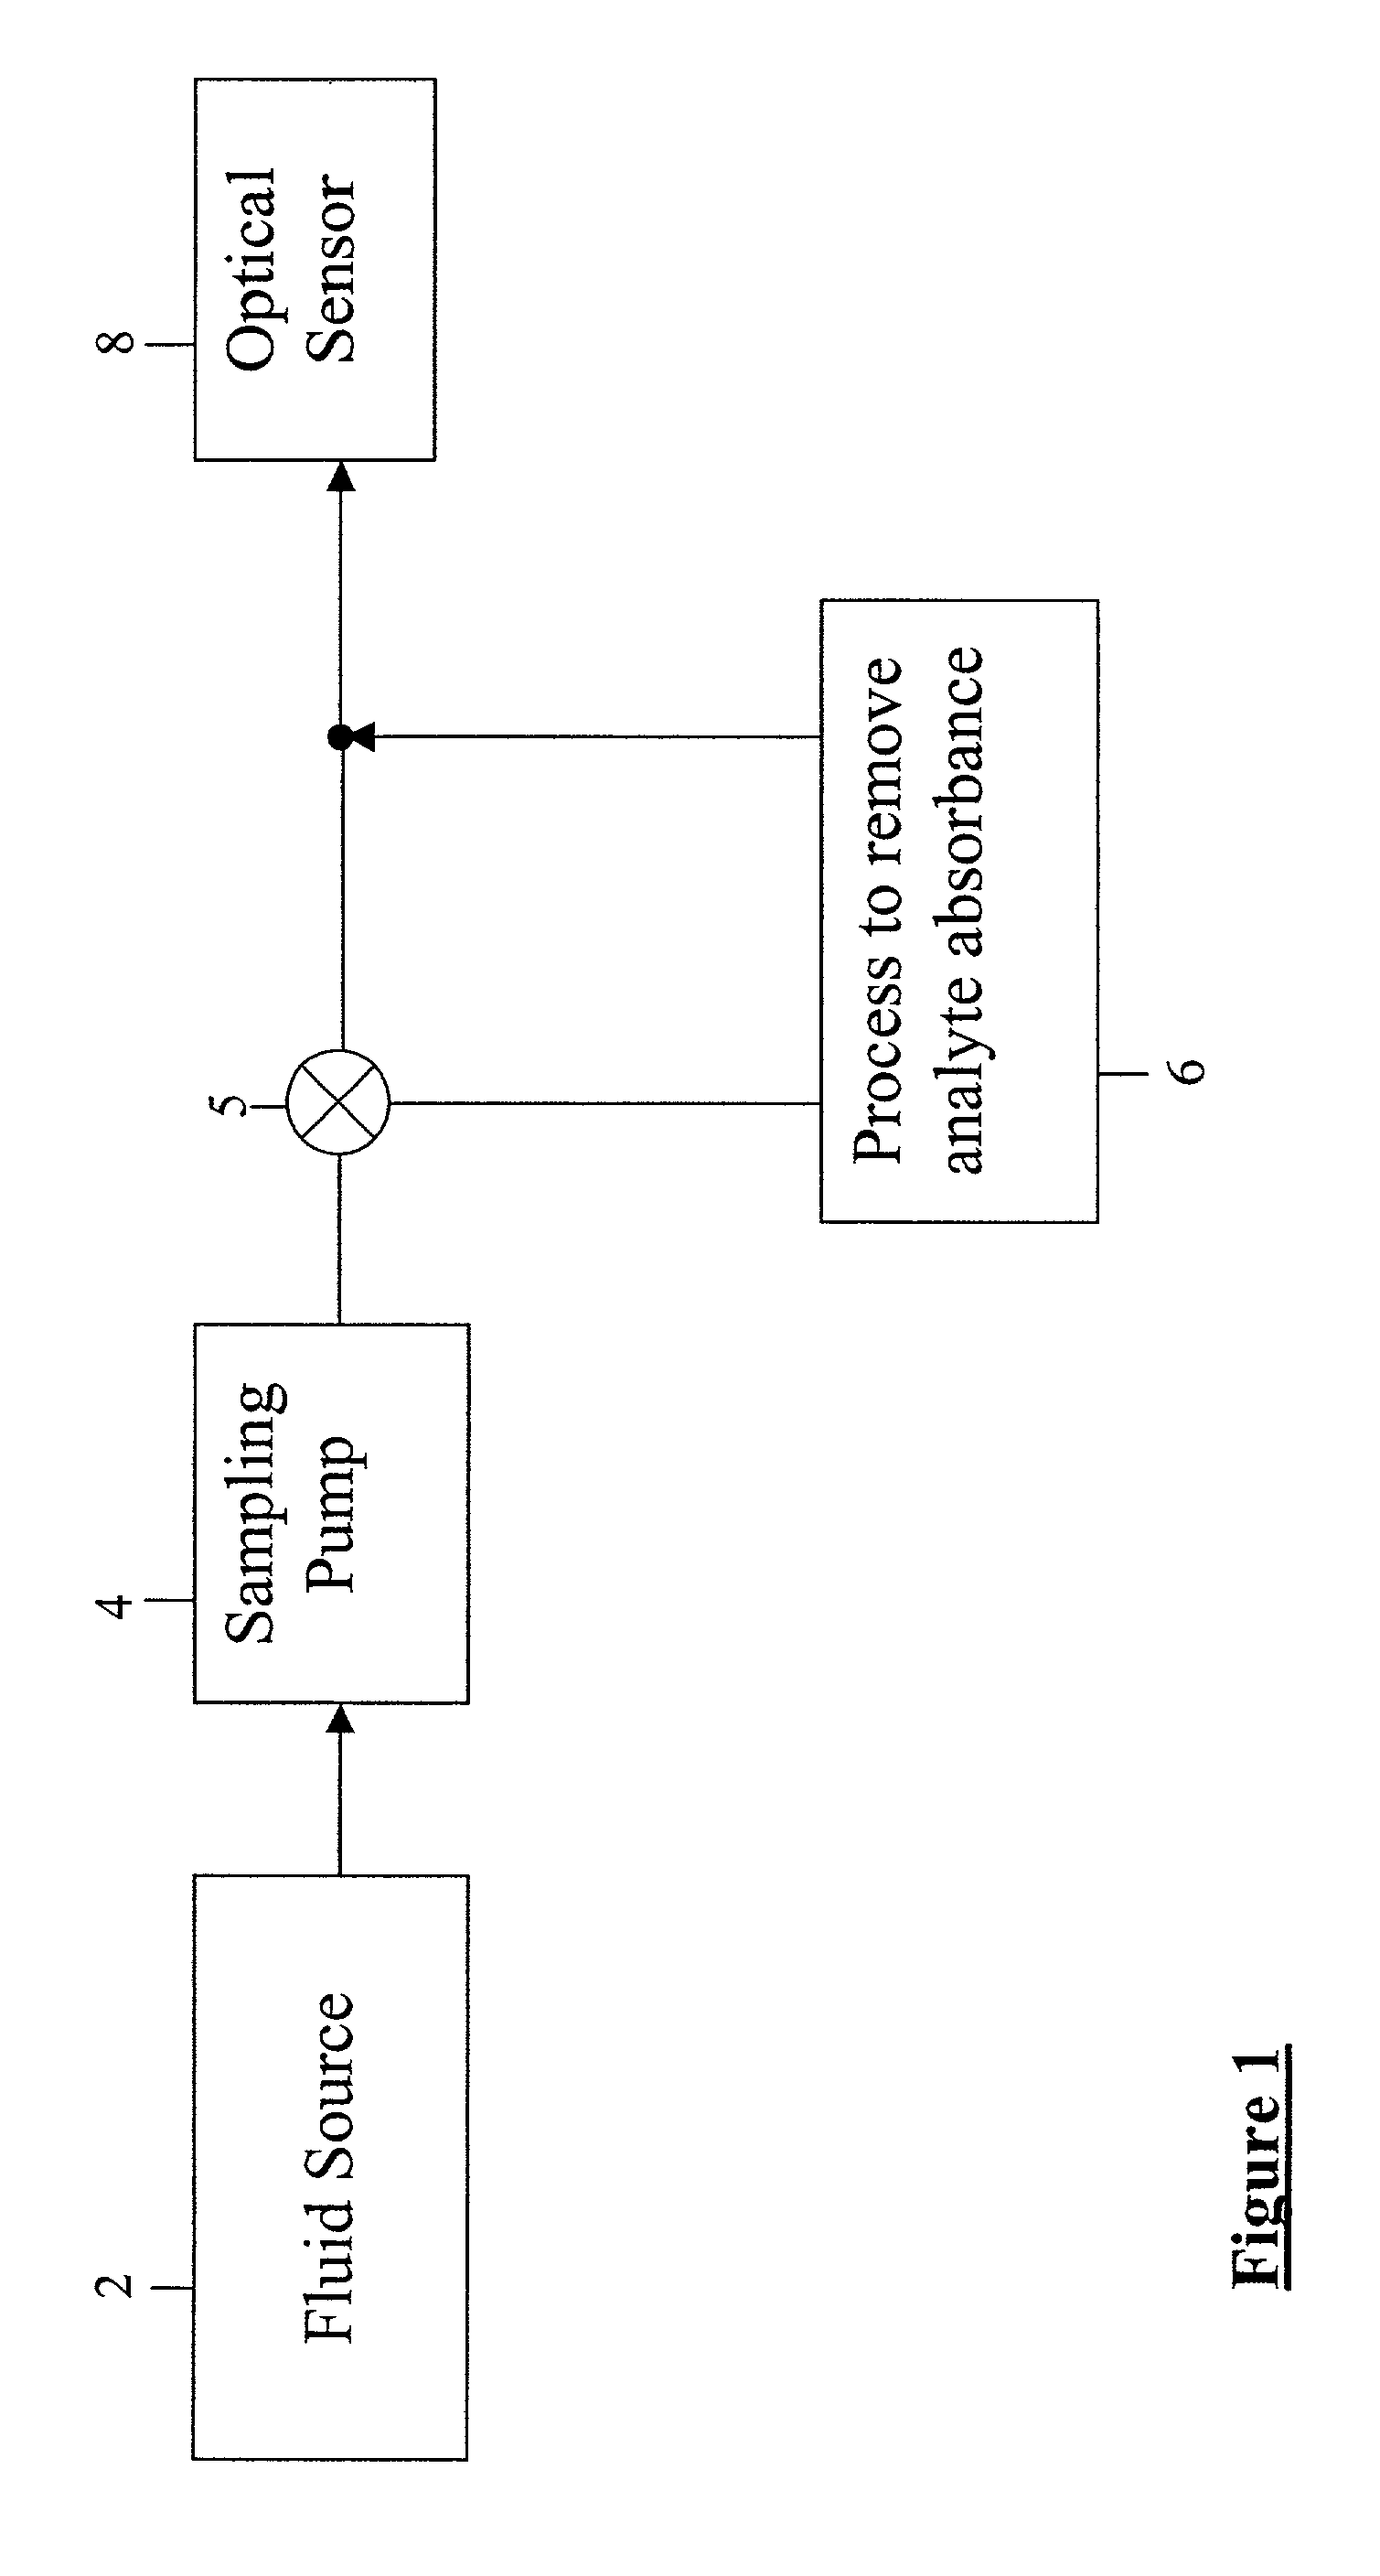 Optical sensor and method for measuring concentration of a chemical constituent using its intrinsic optical absorbance